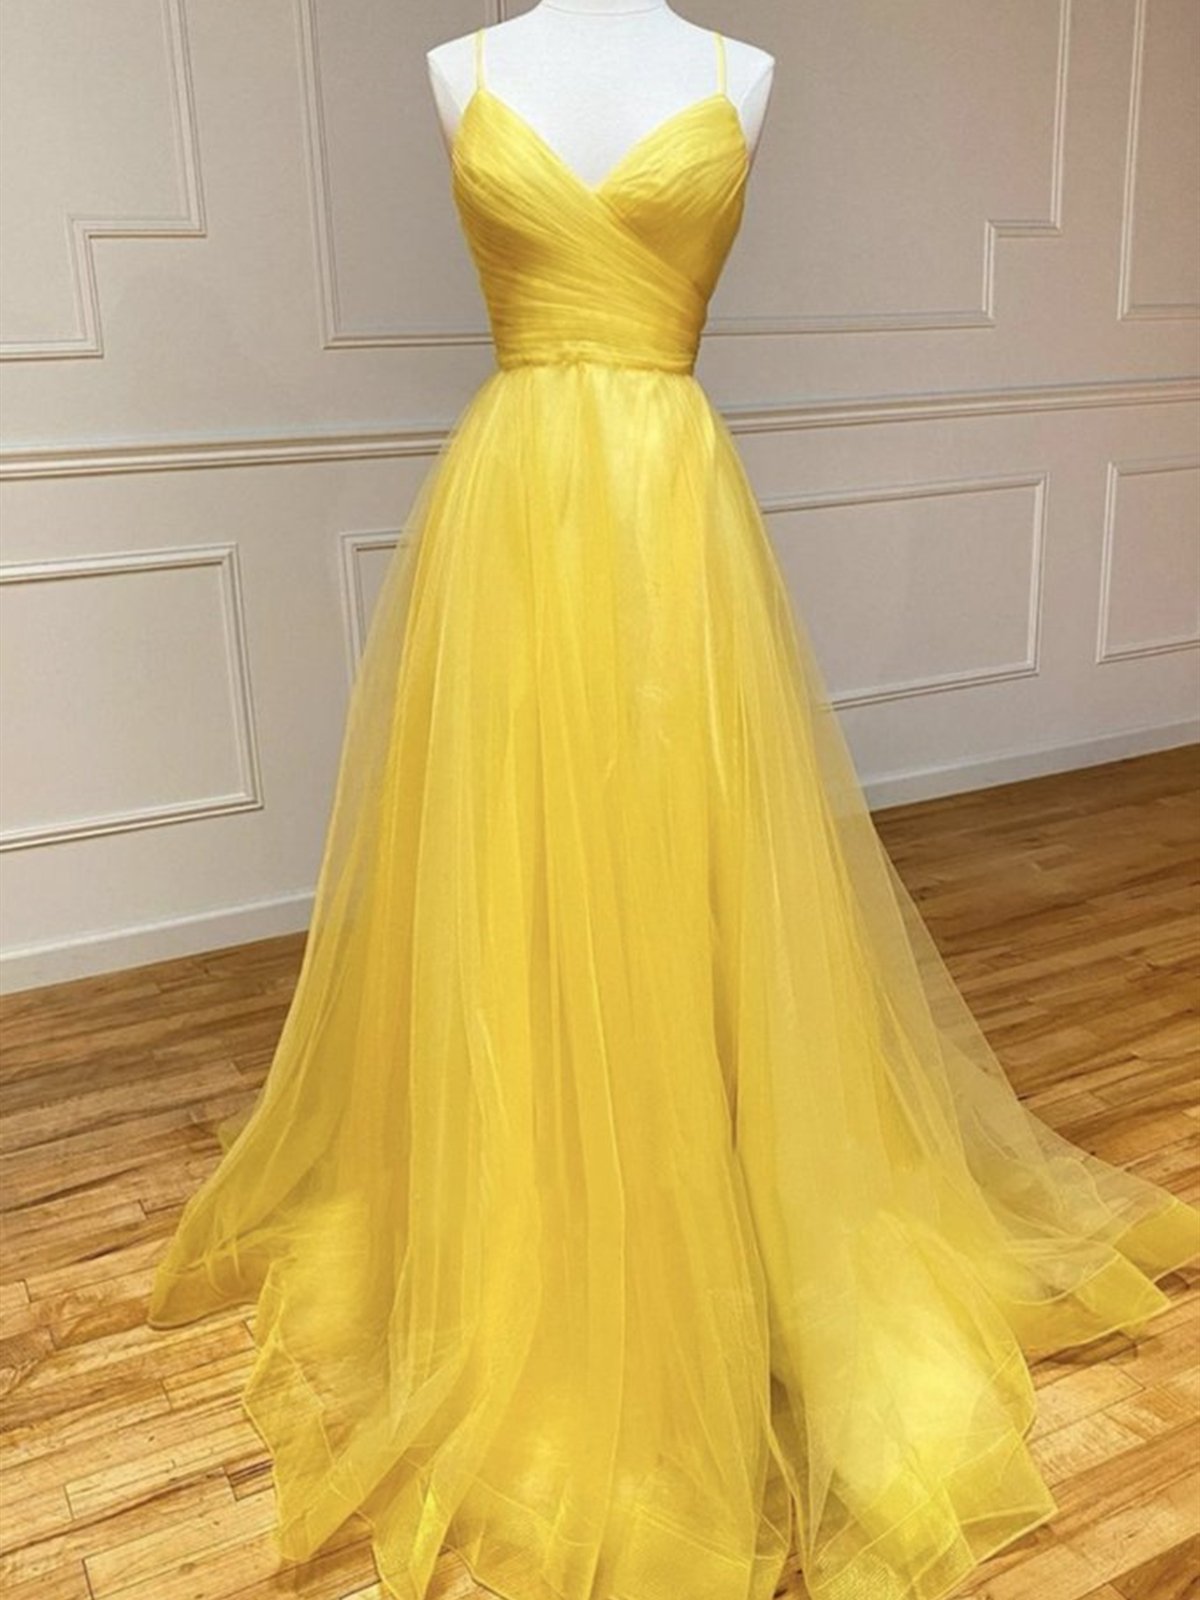 Yellow Tulle Long Formal Evening Dresses, Open Back Yellow Tulle Long Prom Dresses